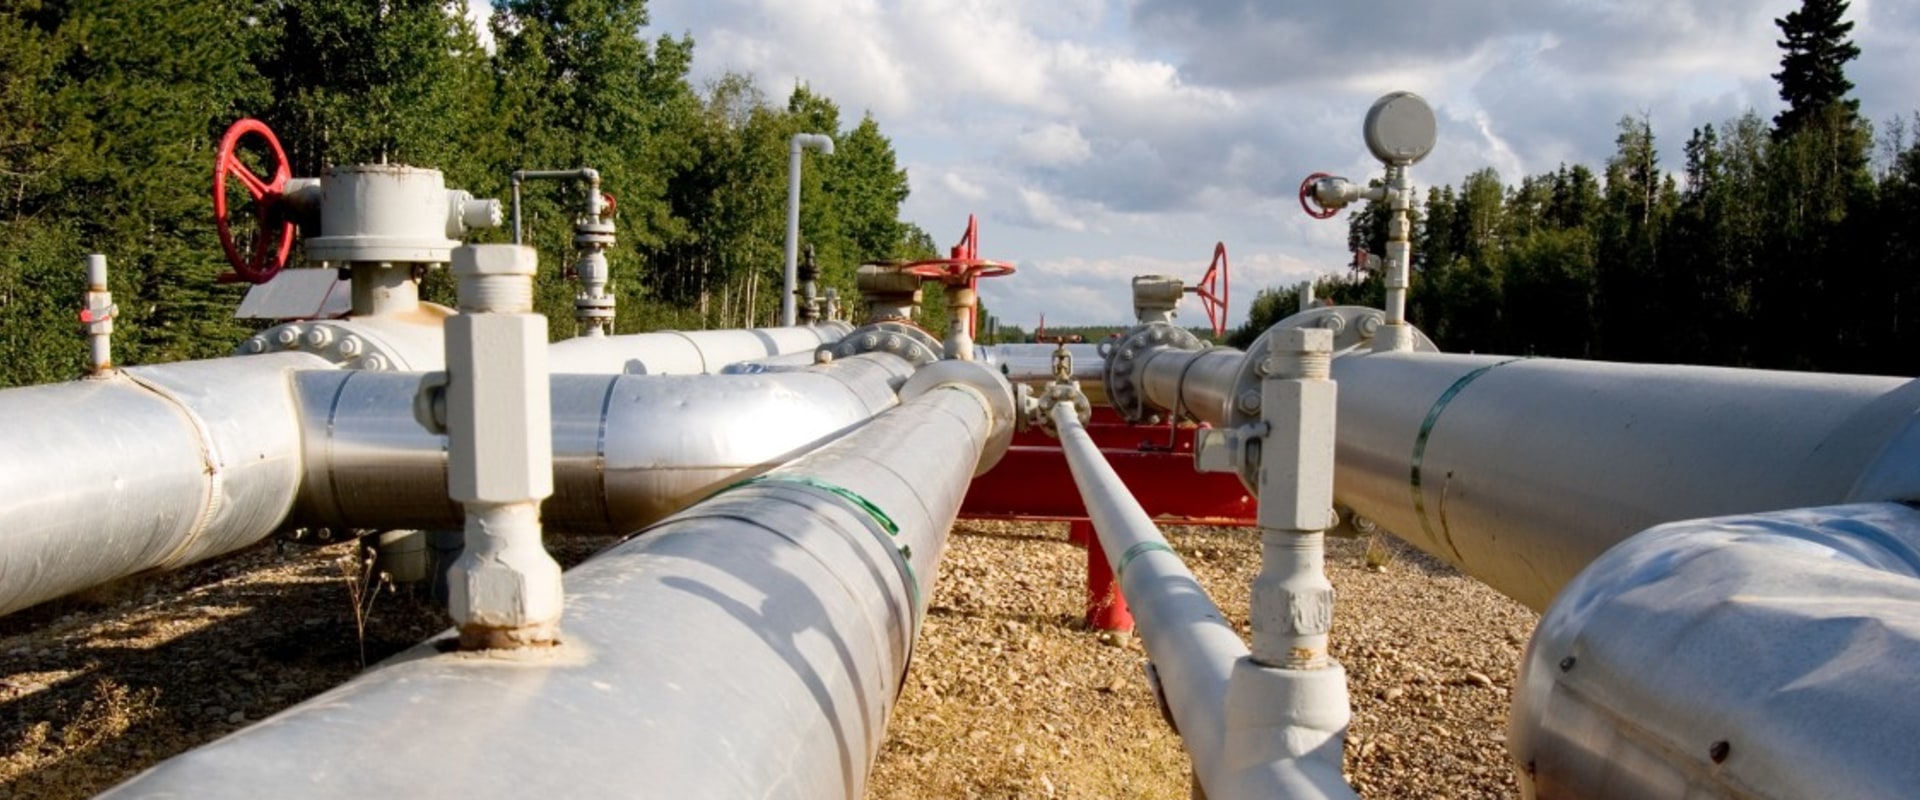 Does natural gas travel through pipelines?